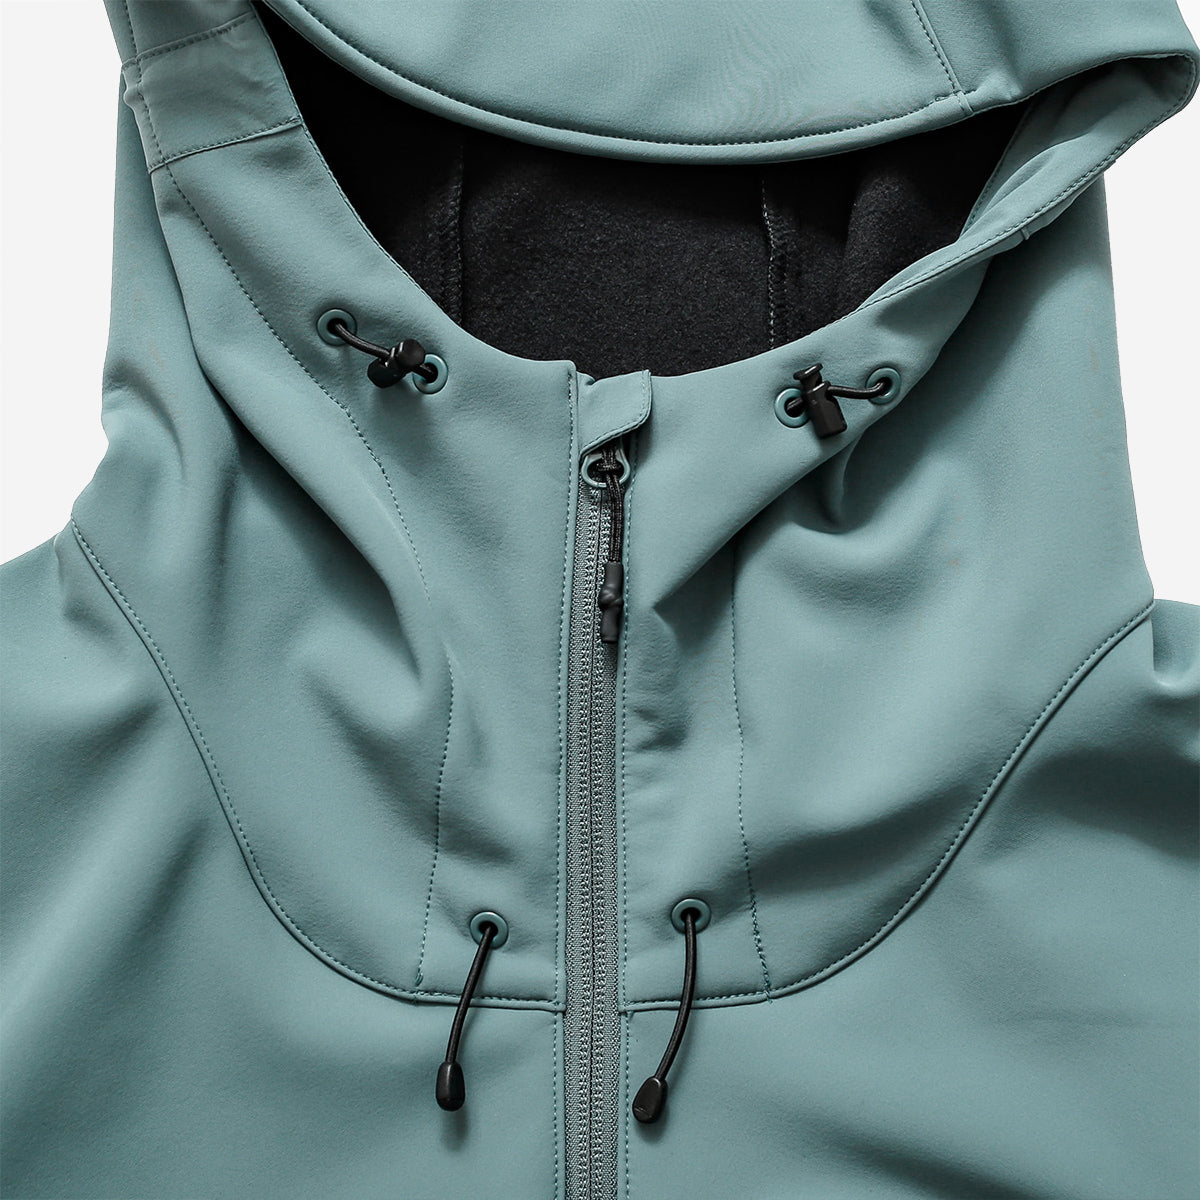 Warm Double Layer Jacket - Teal Blue